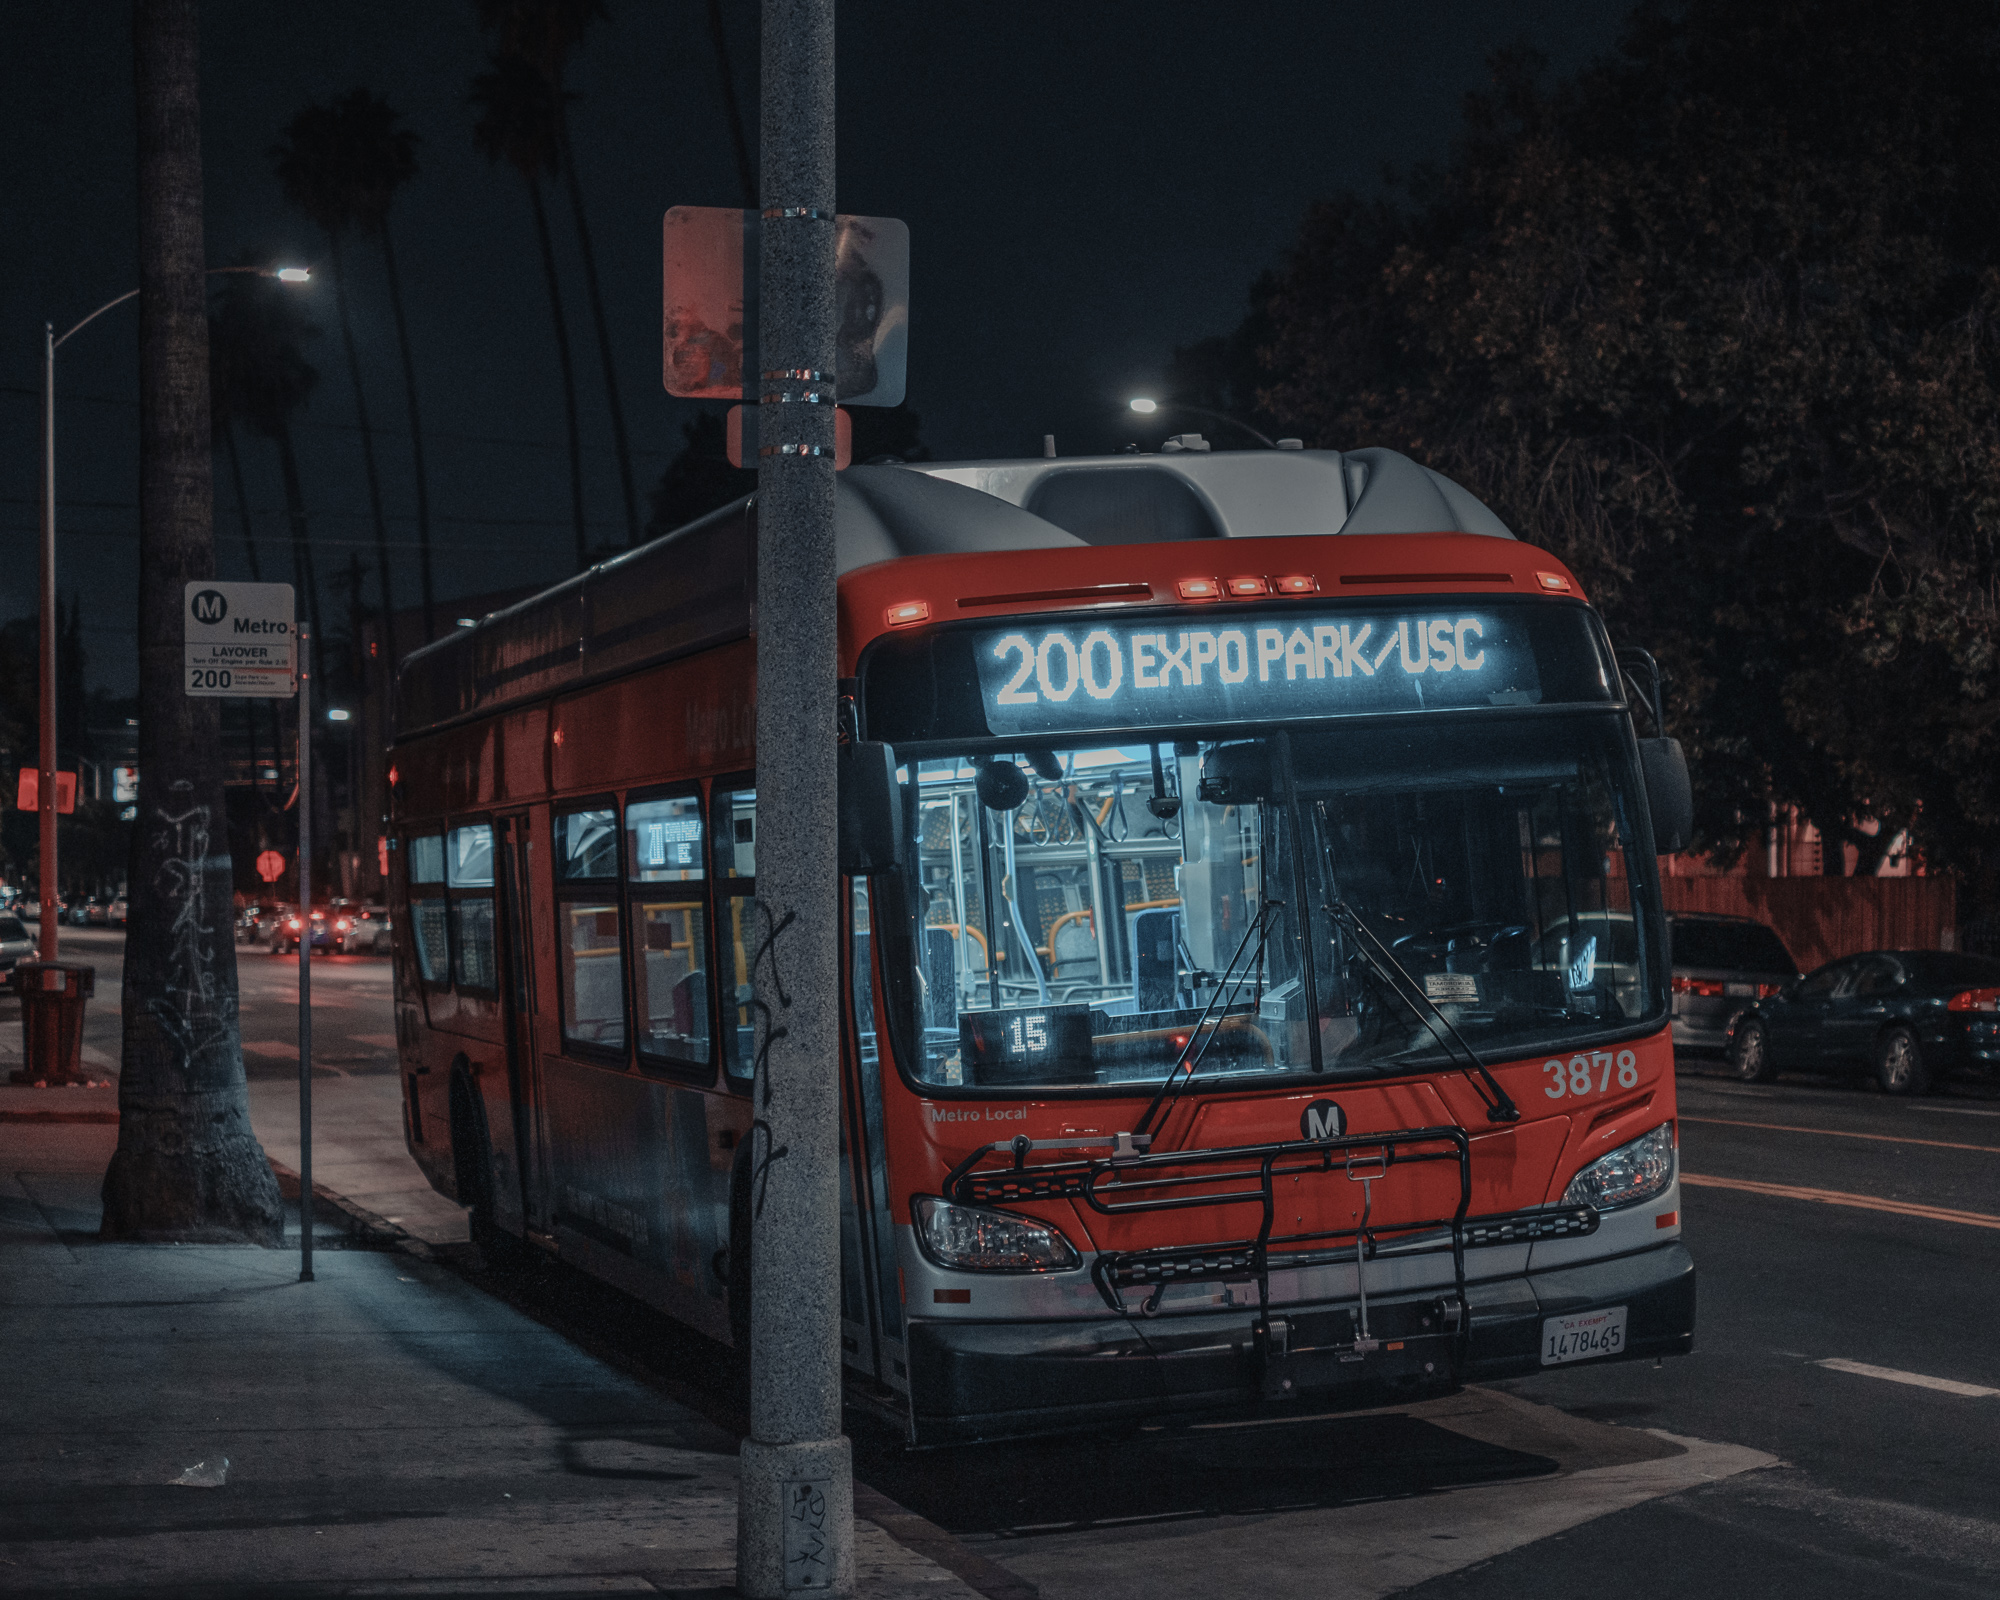 The 200 Bus, Los Angeles, 2018